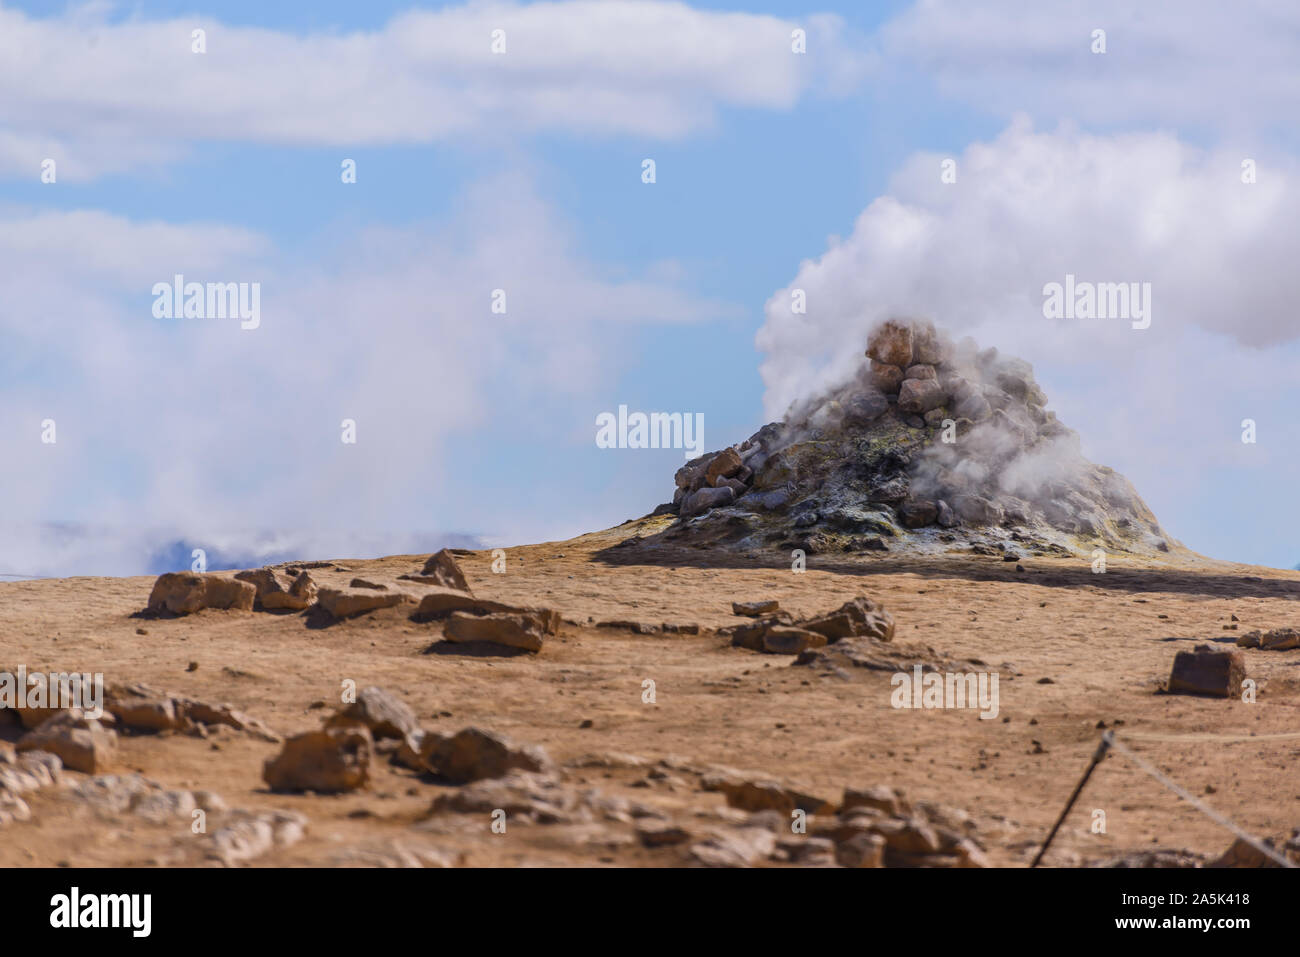 Hillside landscape with rock formation and rising steam against blue sky, Akureyri, Eyjafjardarsysla, Iceland Stock Photo